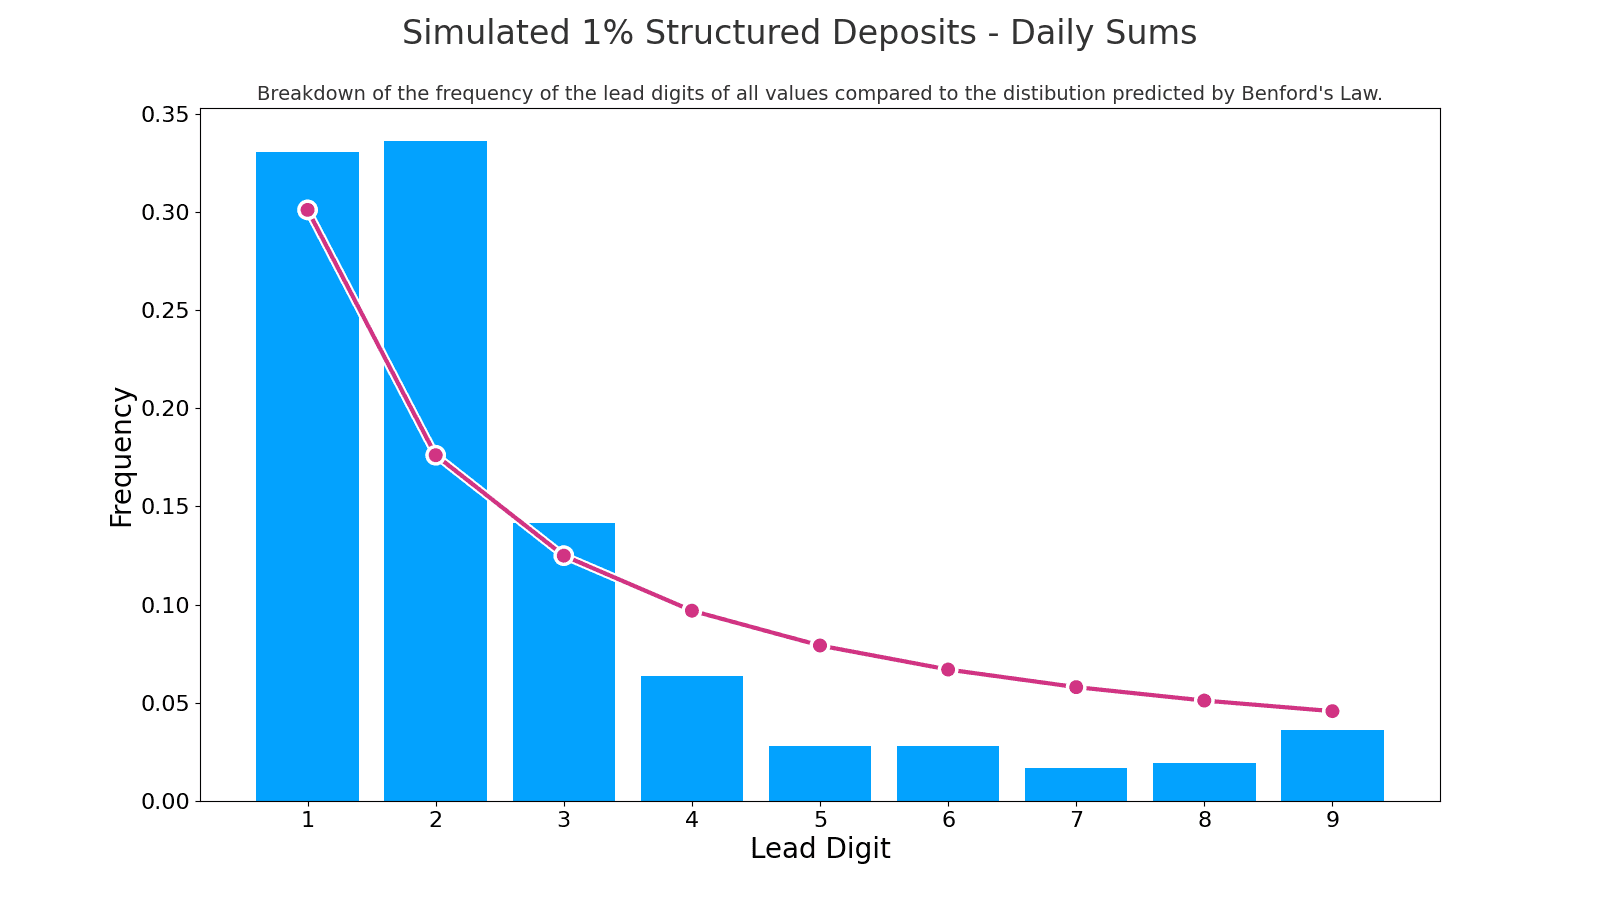 The lead-digit breakdown for the structured transactions scenario.